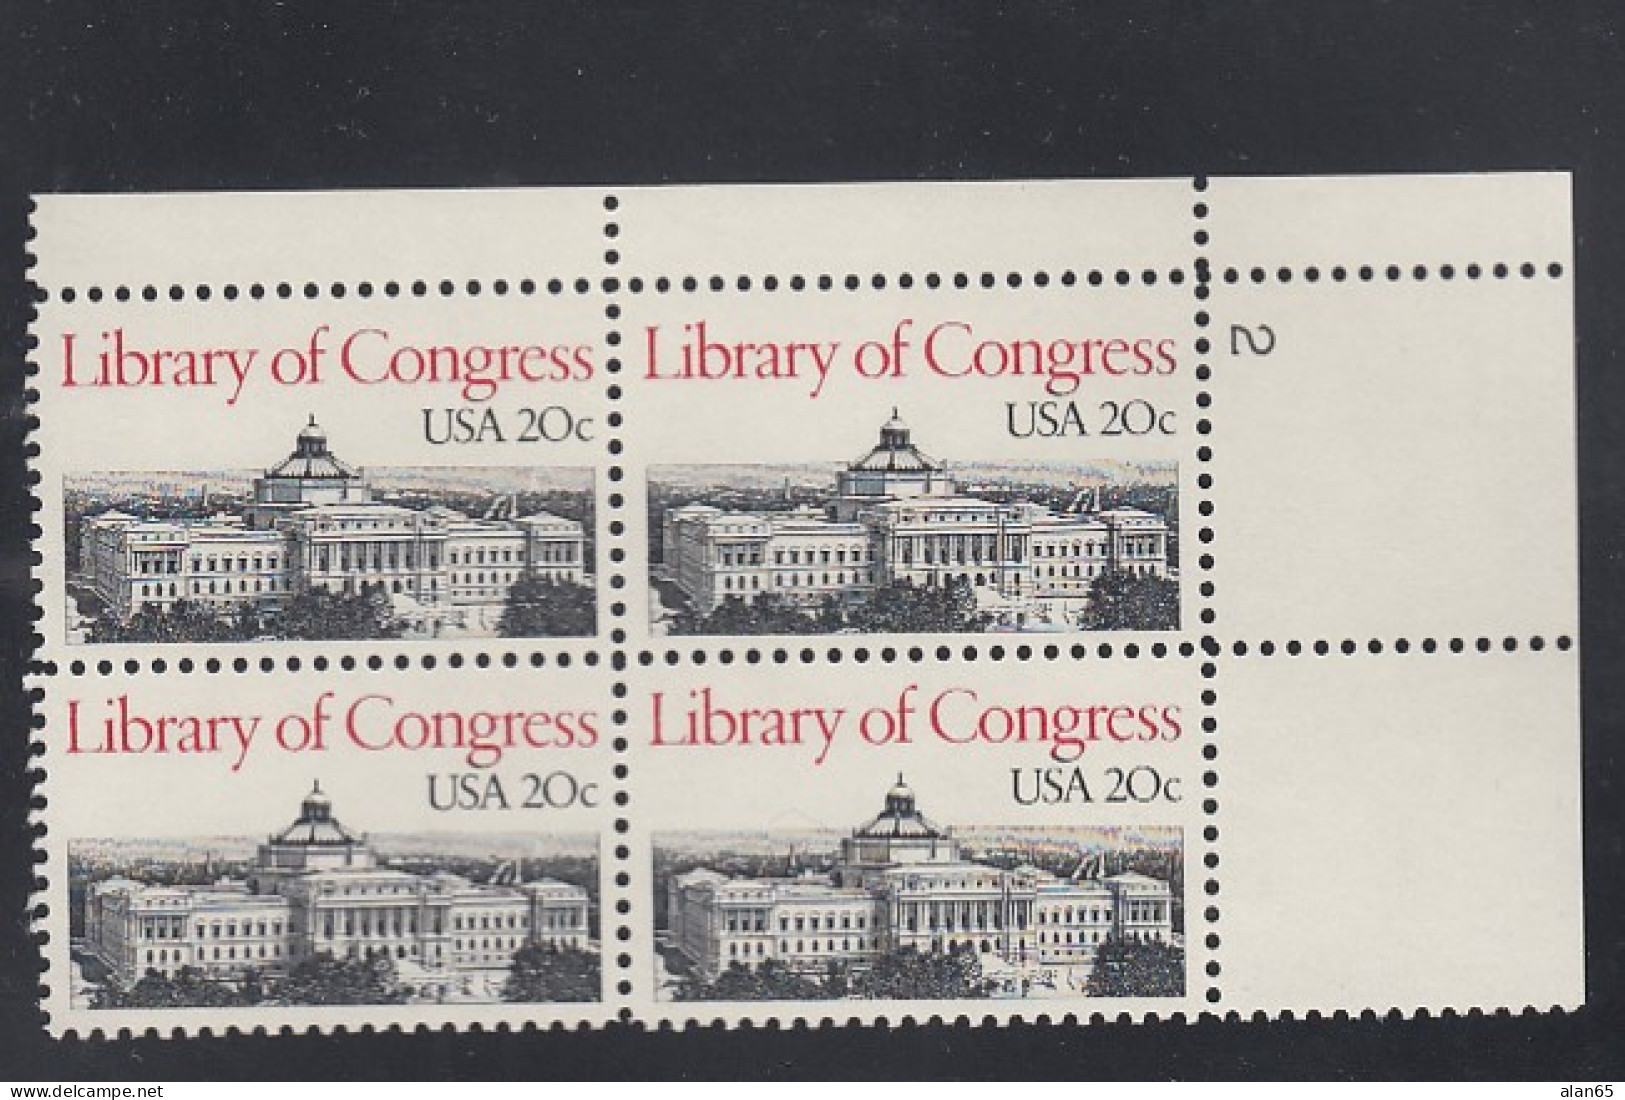 Sc#2004, Plate # Block Of 4 20-cent, US Library Of Congress, US Postage Stamps - Numero Di Lastre